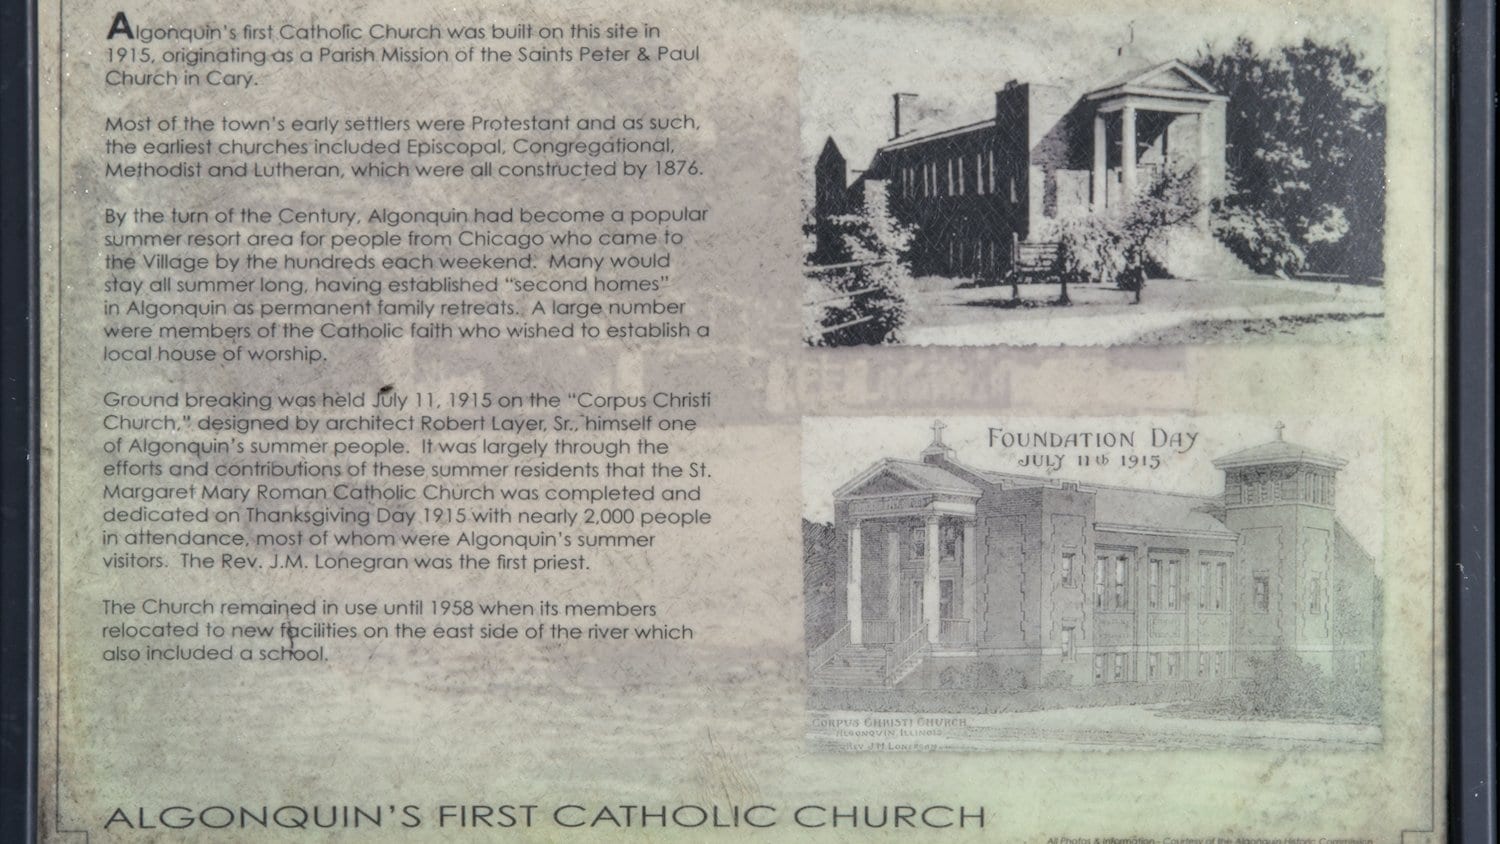 Historical plaque detailing Algonquin's first Catholic Church.